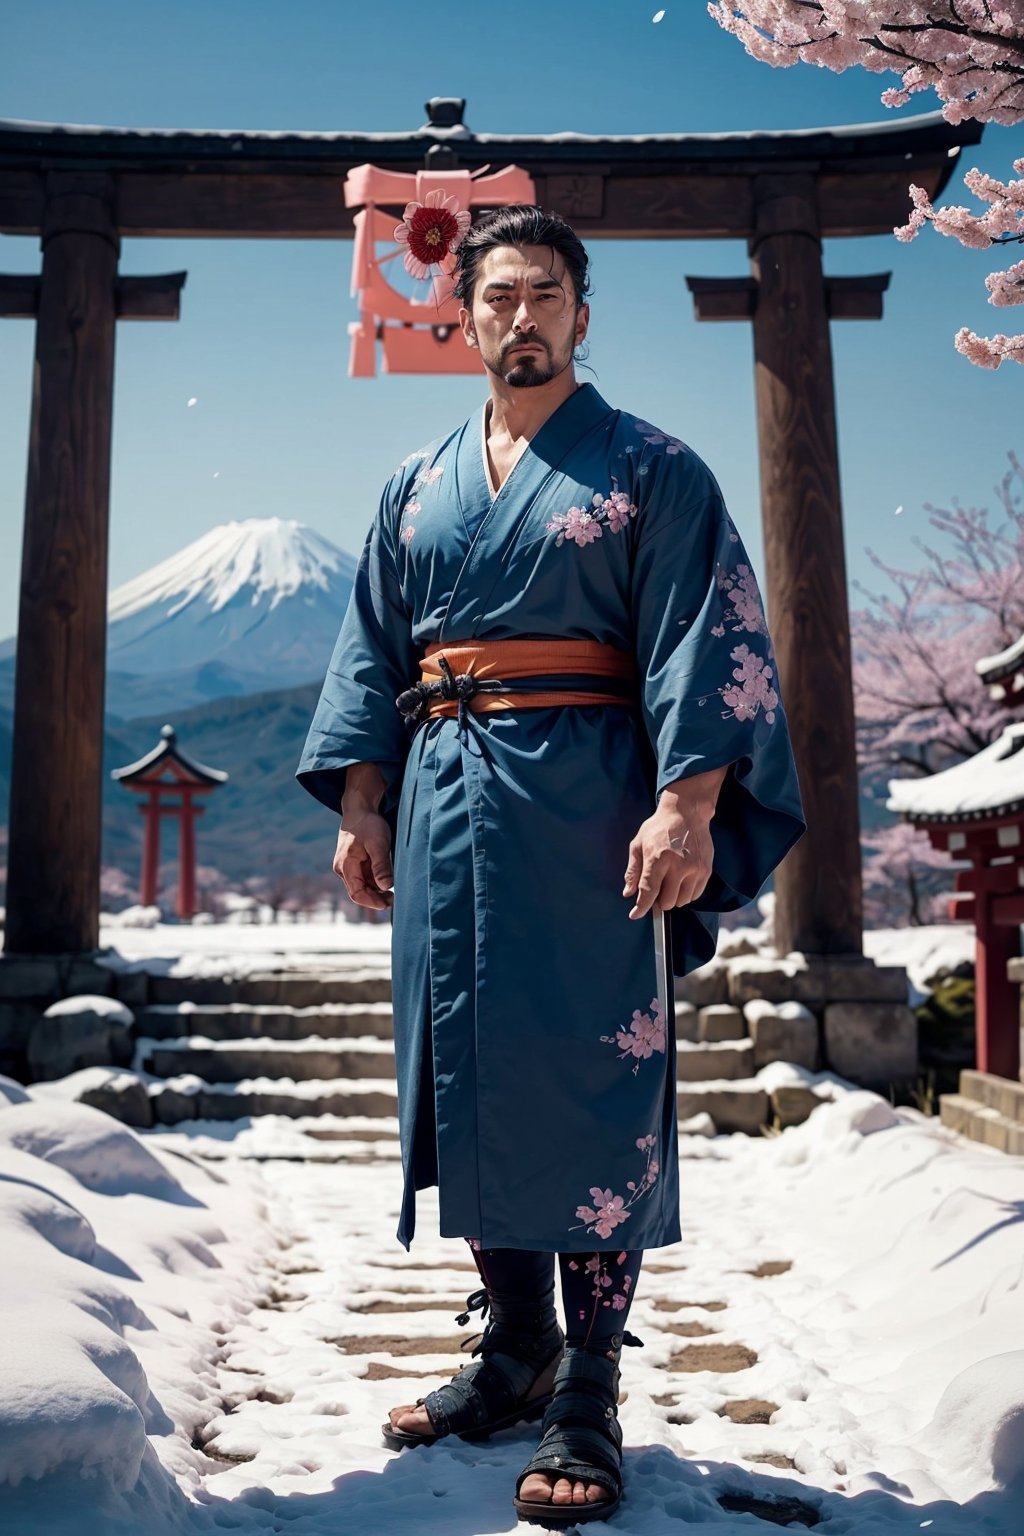 midjourney, niji, 1boy, (((full body portrait))), cut off top of head, hand in frame
,1guy, Random background, wearing best clothes, Cartoon, High detailed face, Realism, beard, (((A stoic samurai with a weathered face and a steely gaze, clad in a deep blue kimono adorned with intricate silver embroidery depicting cherry blossoms. He stands confidently beneath a majestic torii gate, the rising sun casting a warm glow on his katana held firmly in his grasp. Mount Fuji looms majestically in the background, its snow-capped peak symbolizing resilience and strength.)))